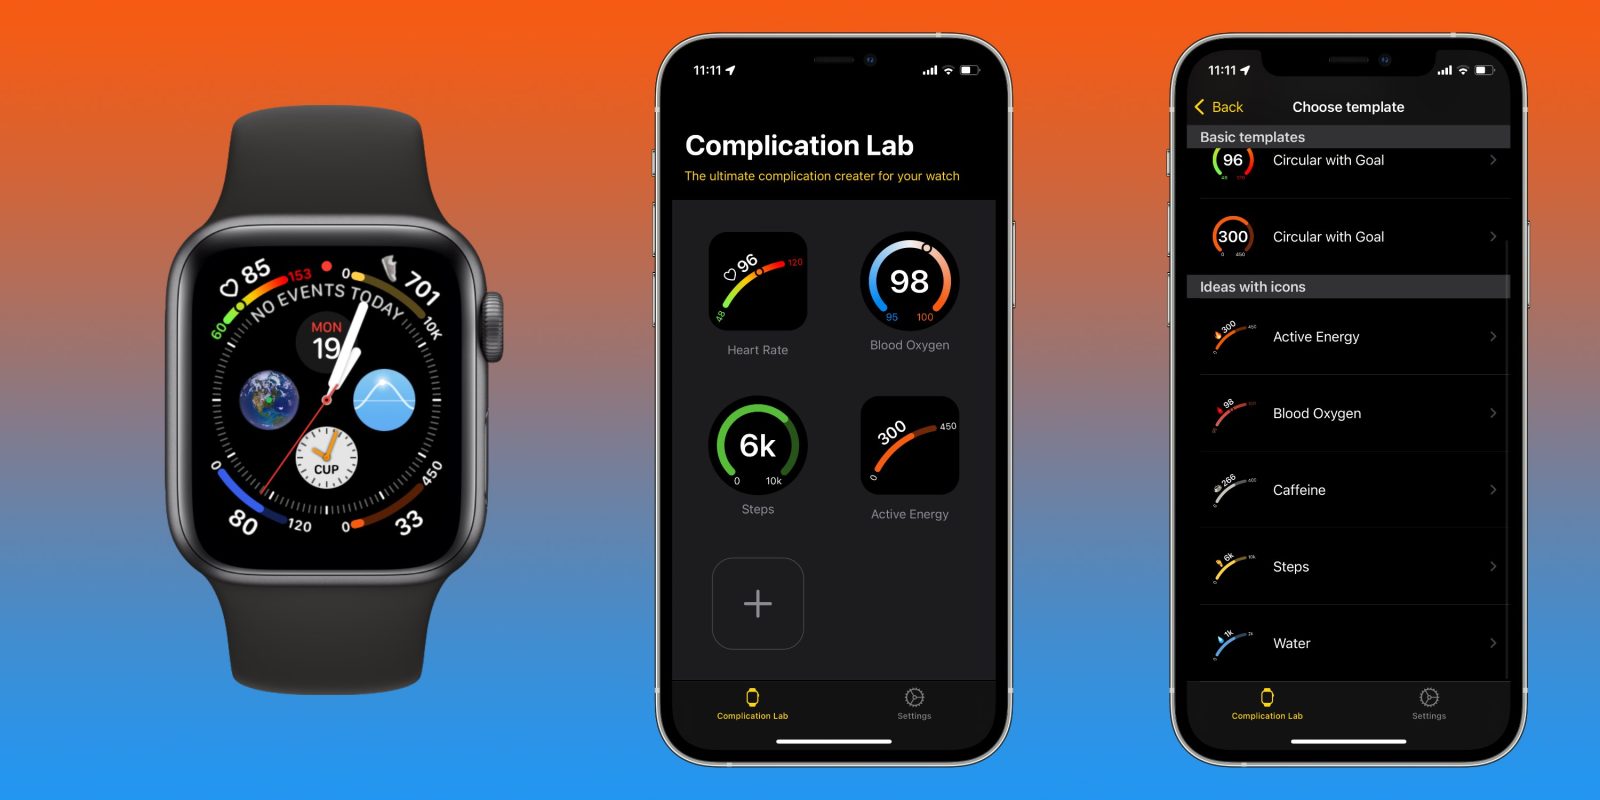 How to make custom Apple Watch complications with health data